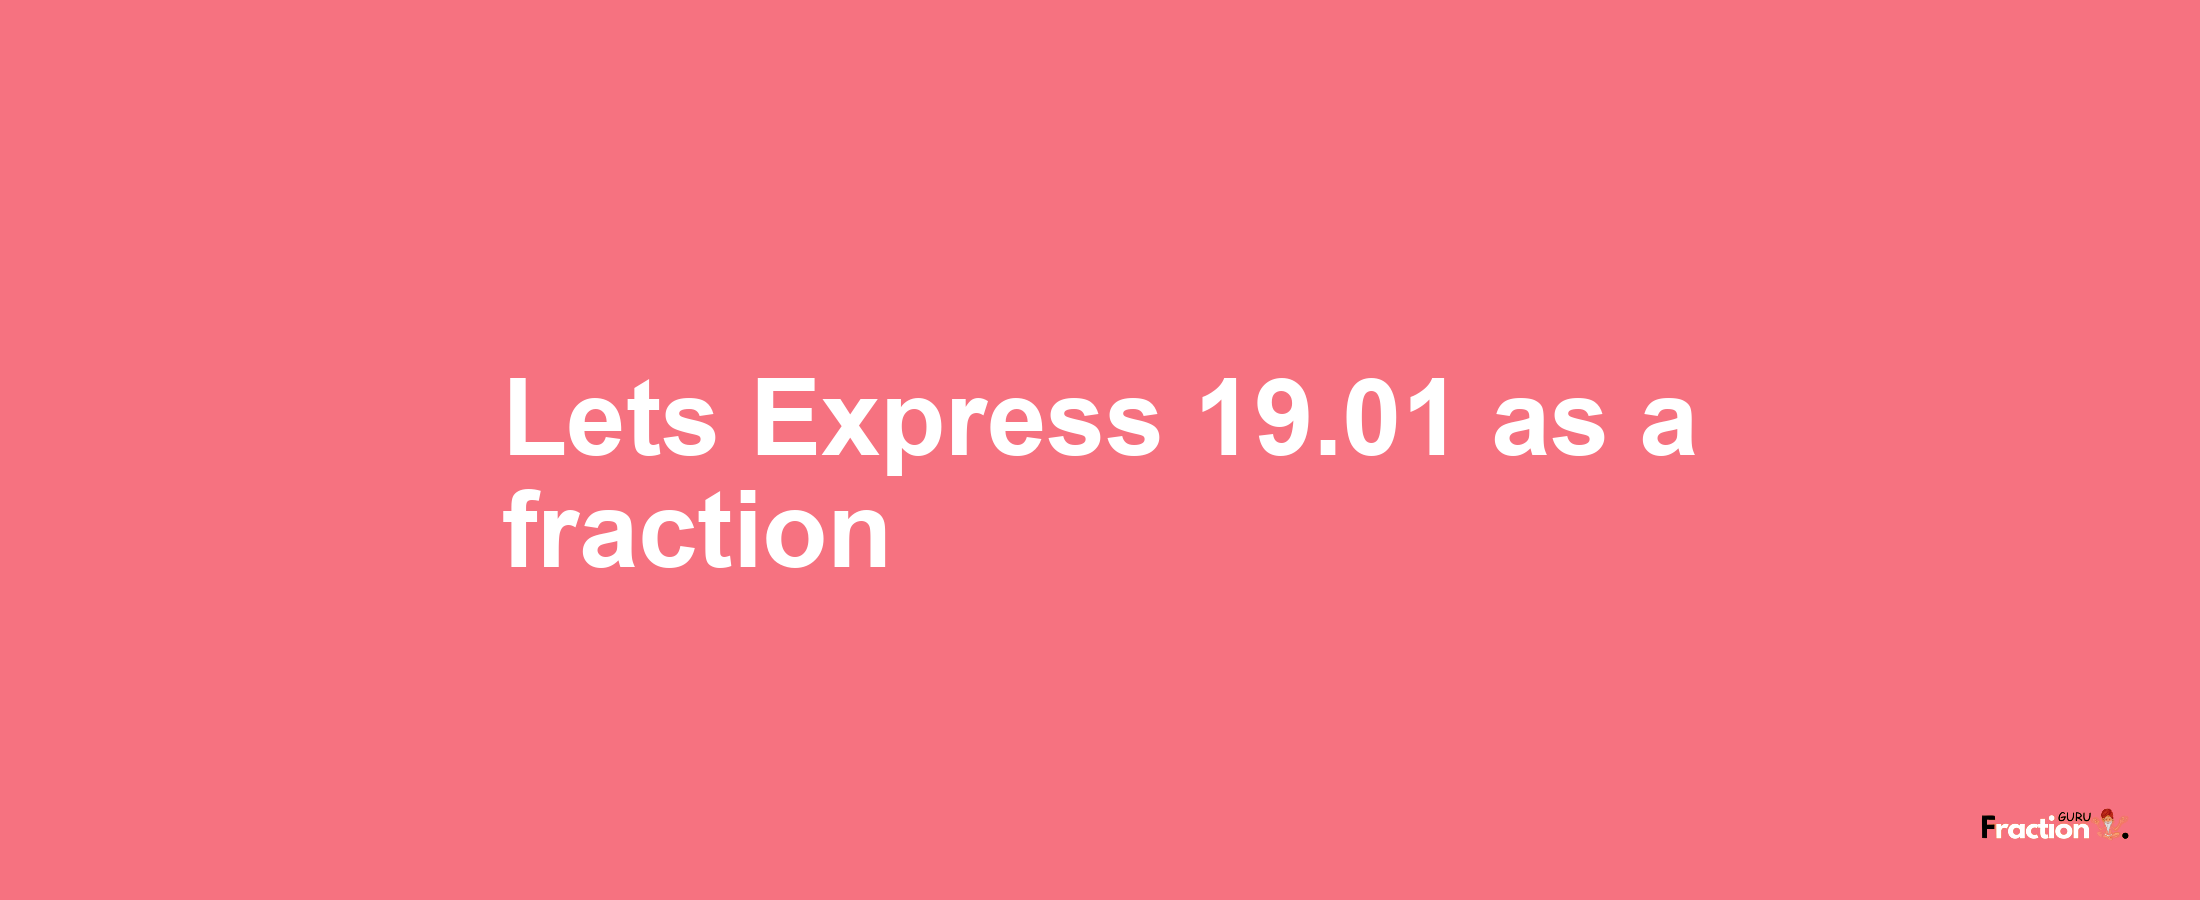 Lets Express 19.01 as afraction